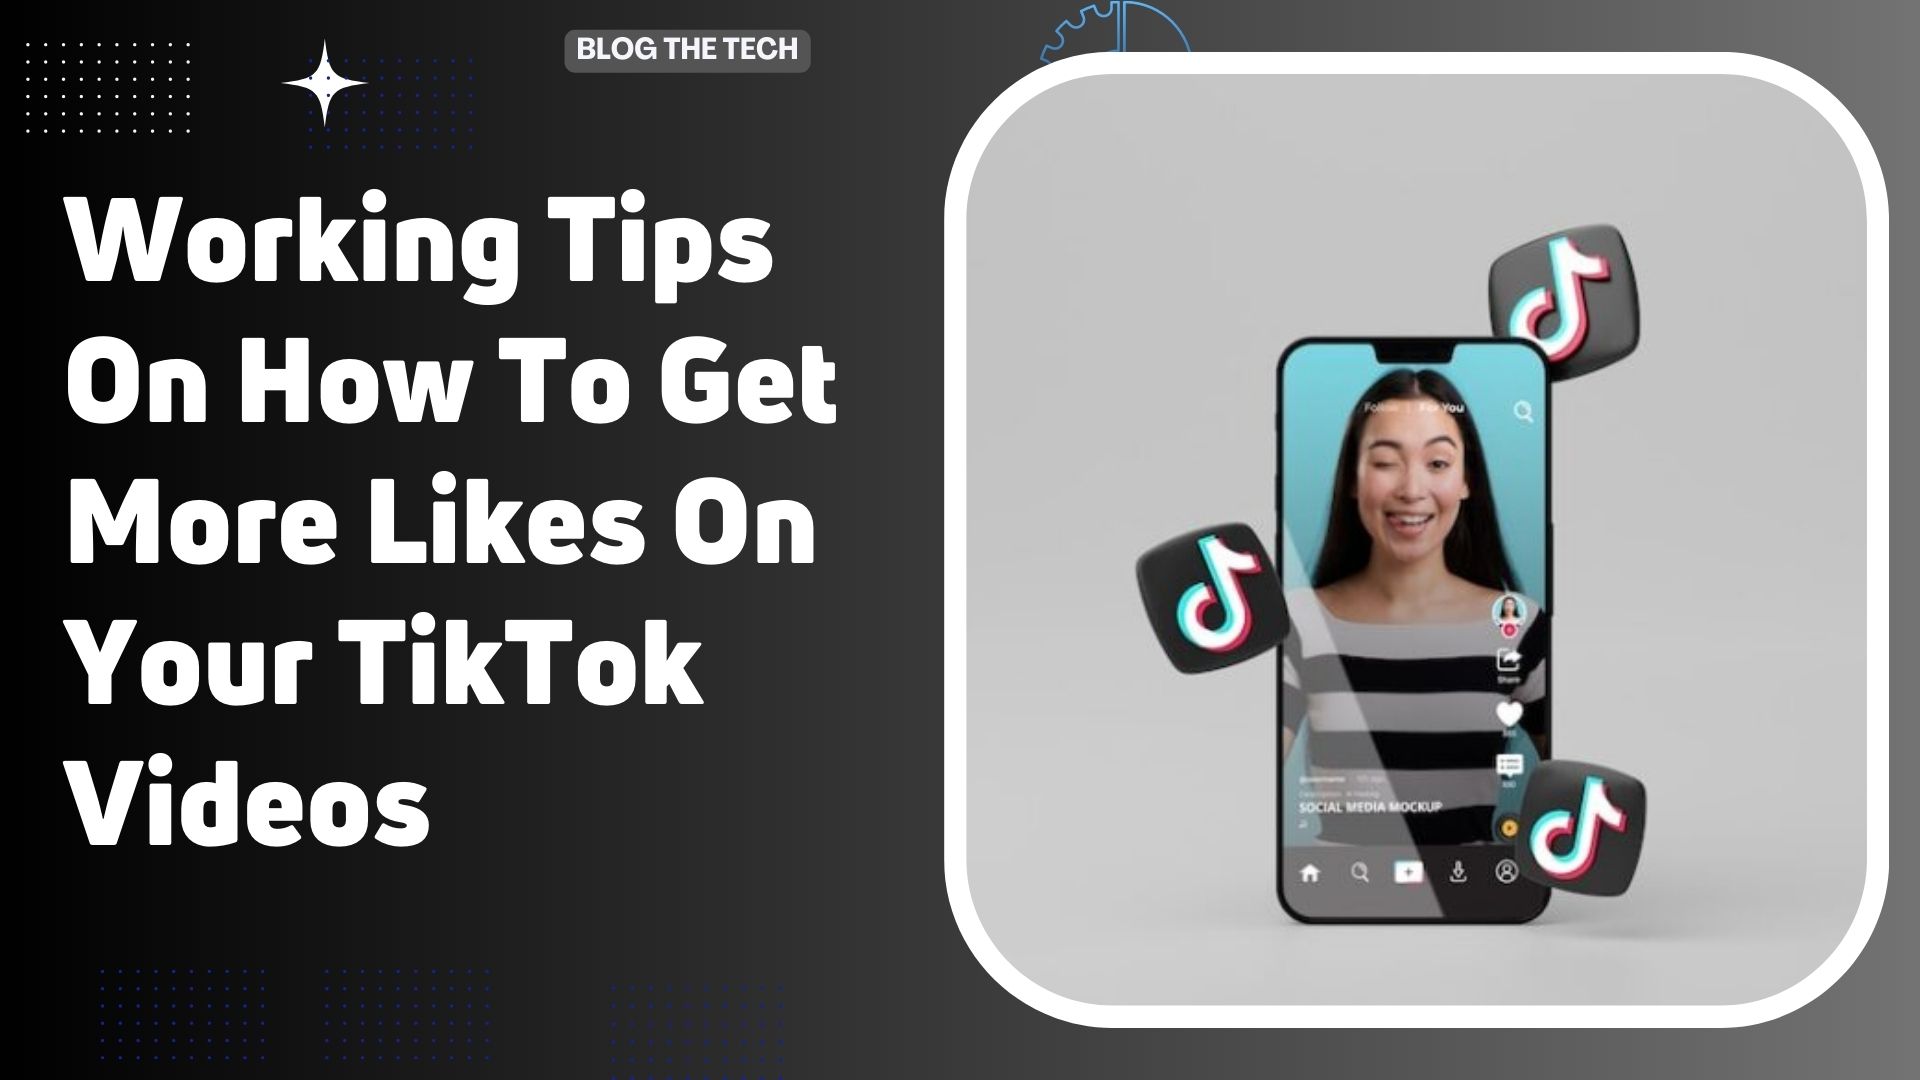 8 Working Tips On How To Get More Likes On TikTok Videos